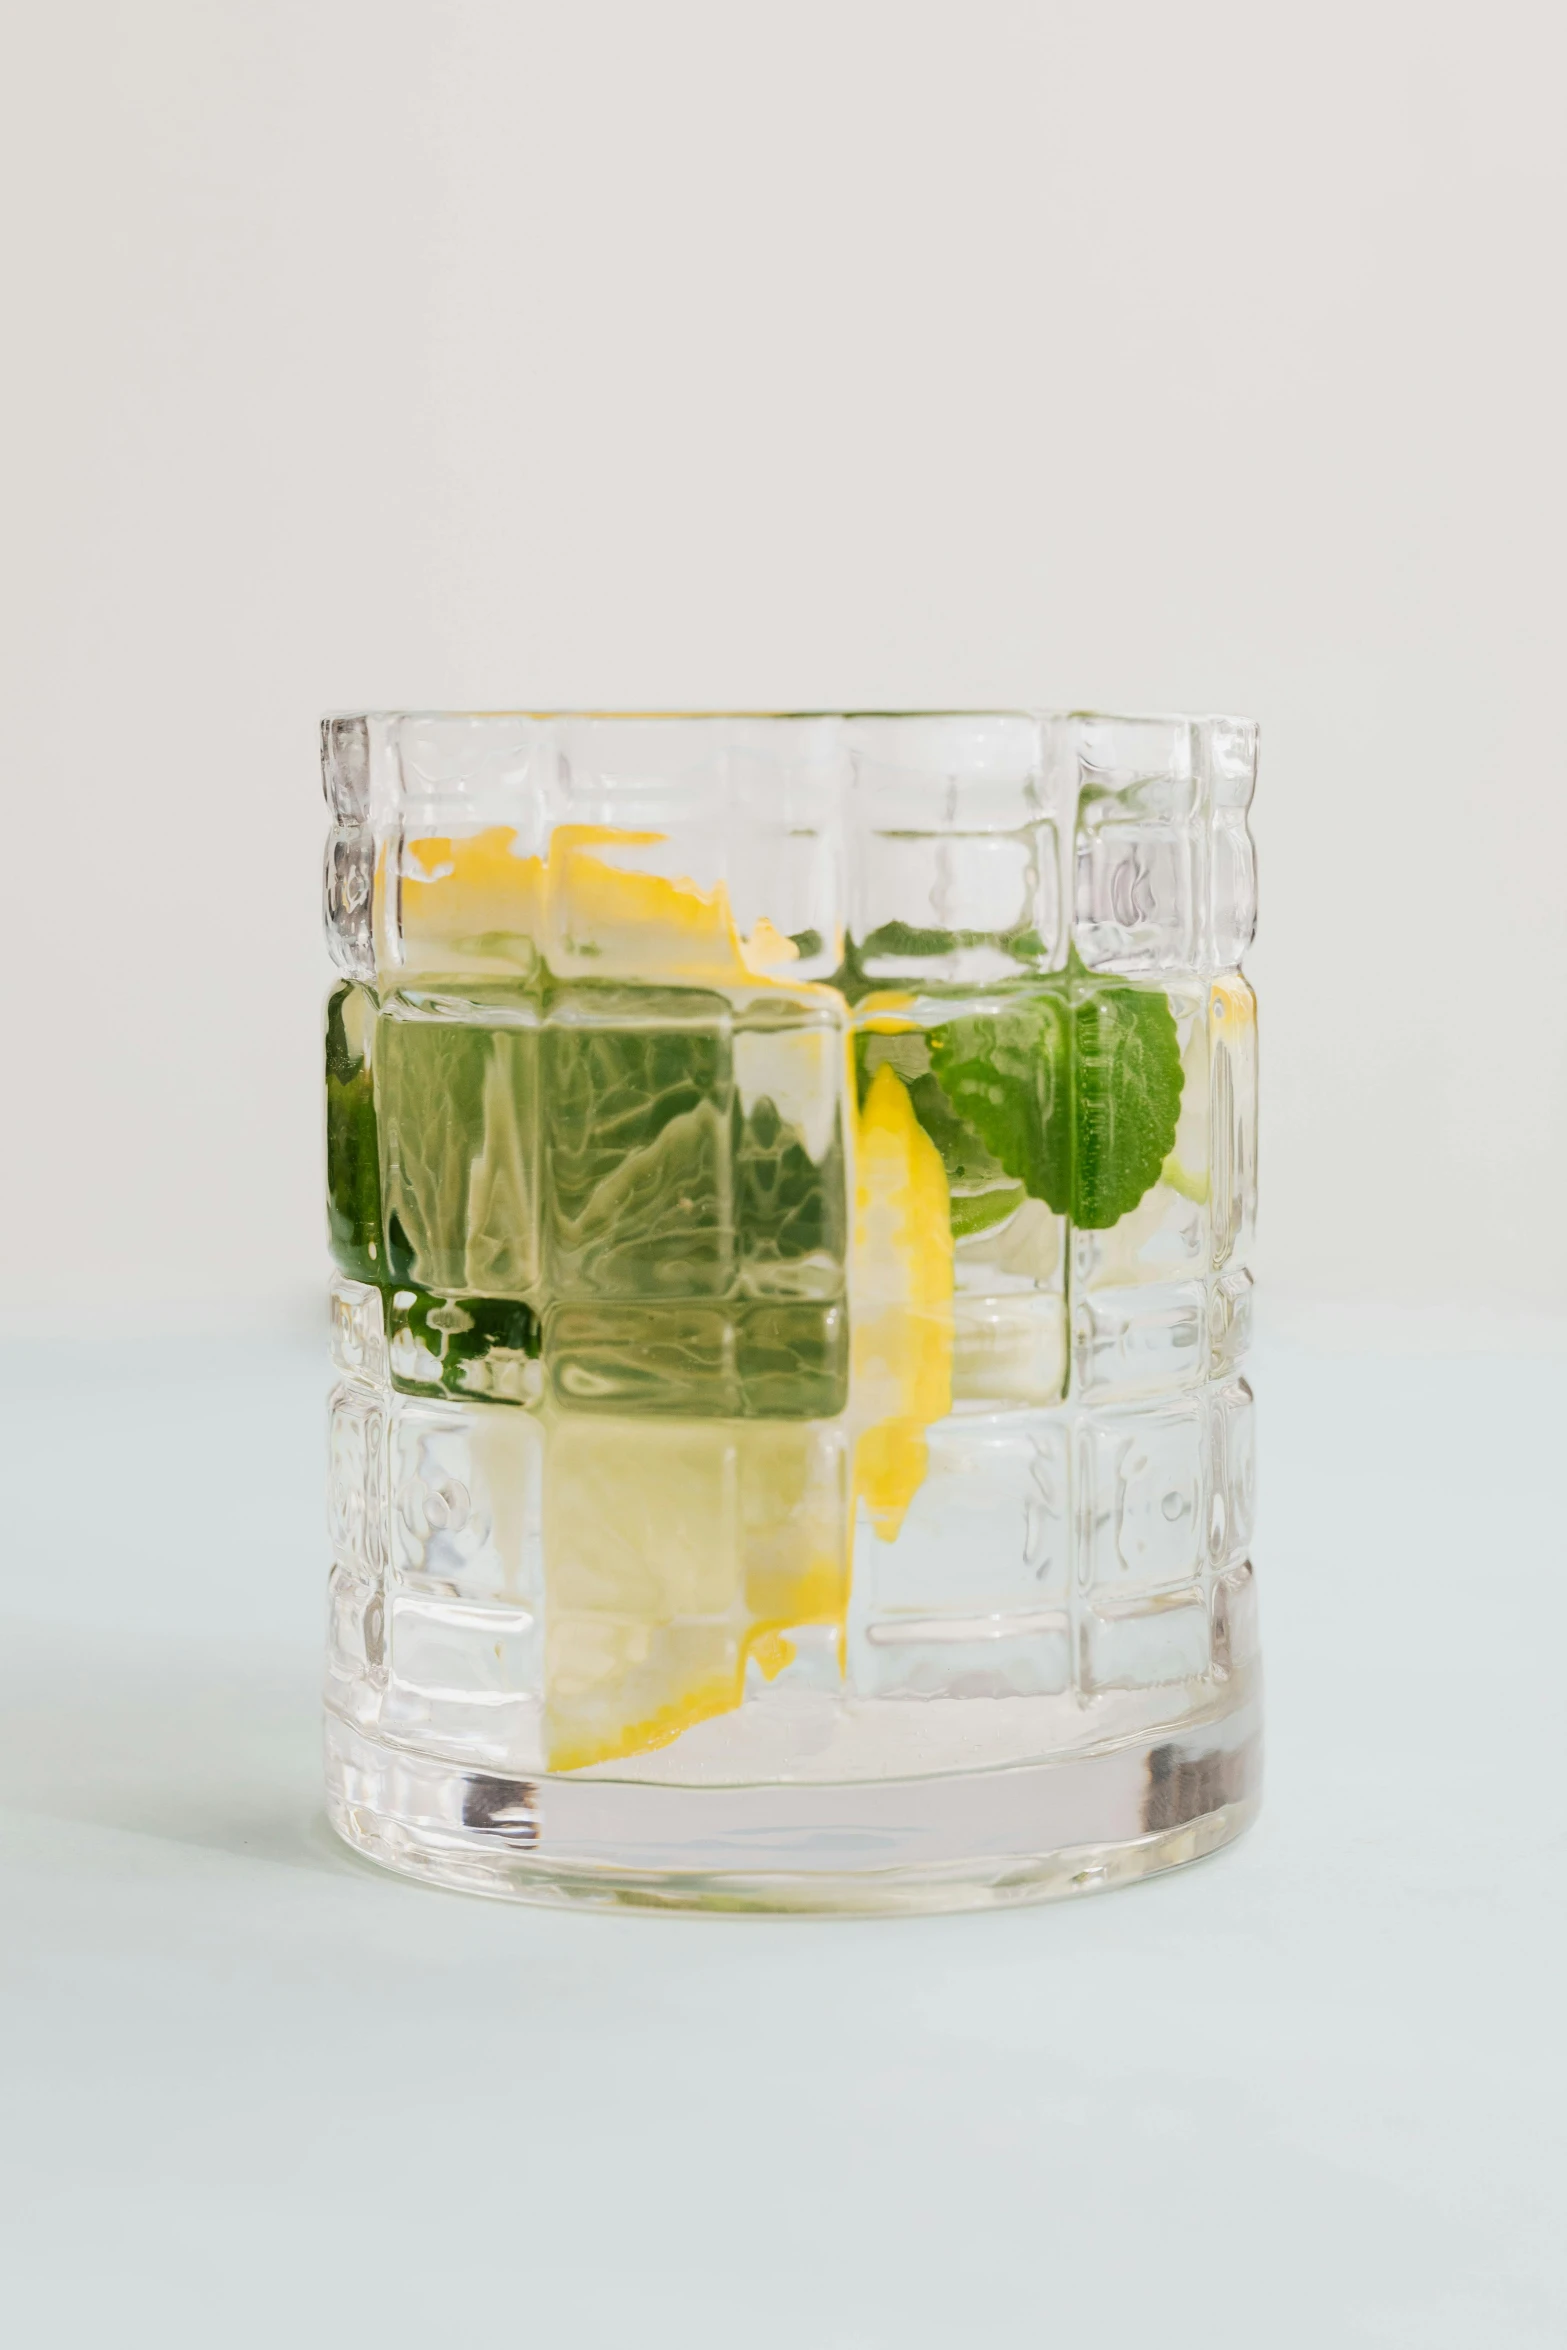 a close up of a glass of water with lemon and mint, by Nina Hamnett, crystal cubism, square glasses, 35 mm product photo”, multi-part, bar